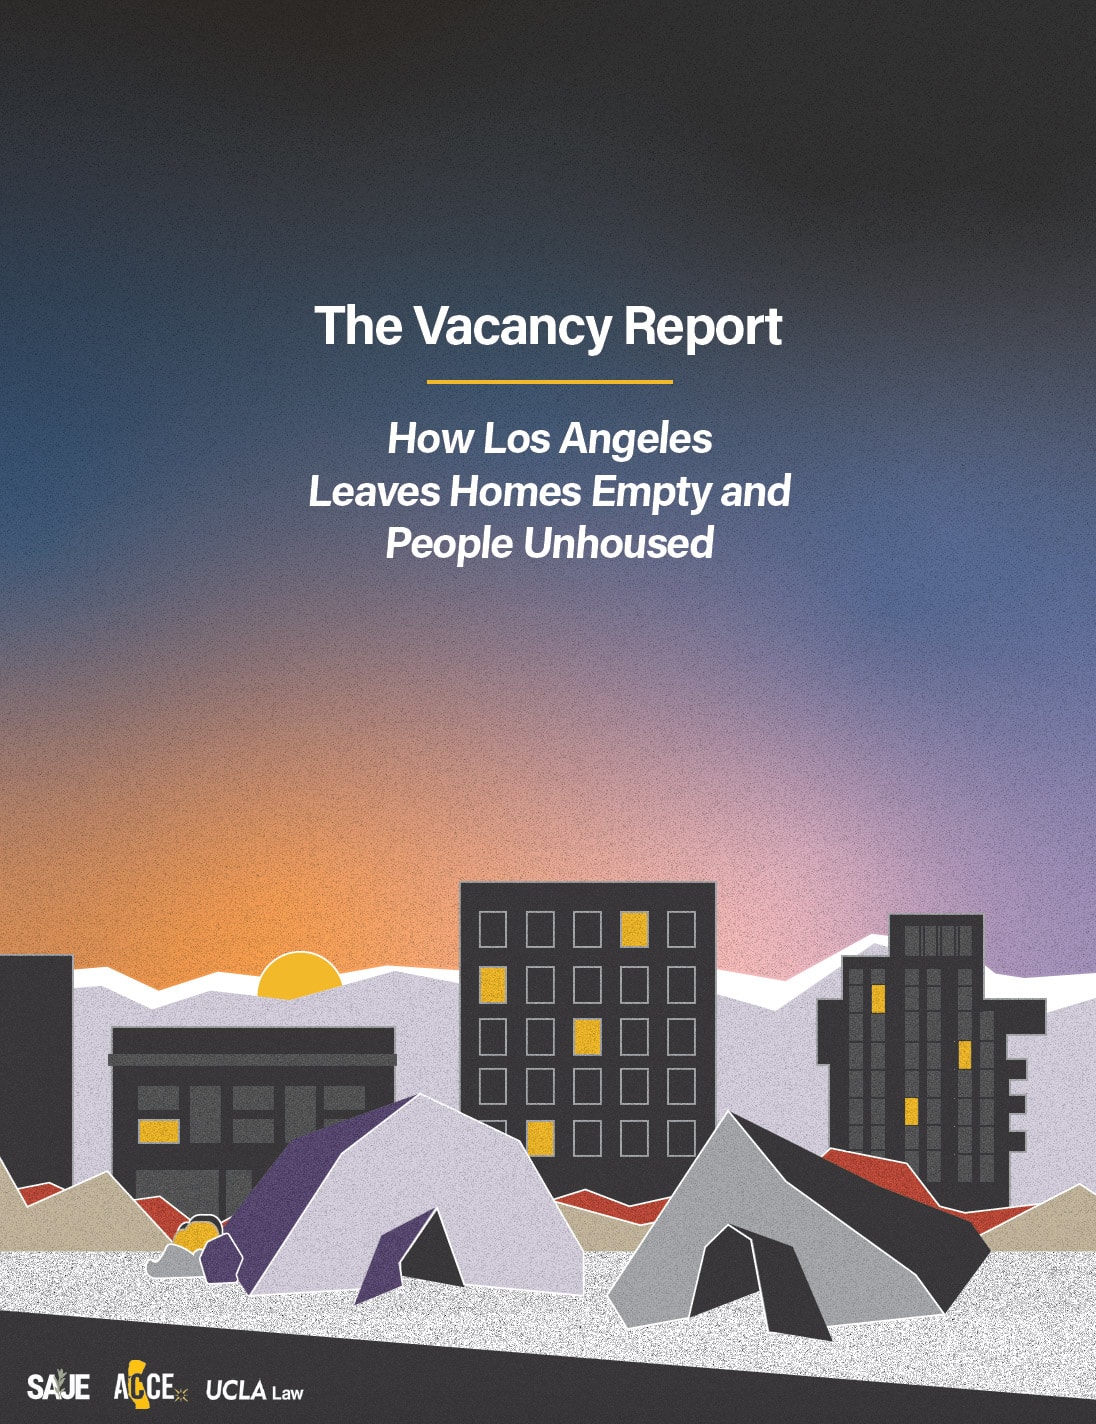 The Vacancy Report: How Los Angeles Leaves Homes Empty and People Unhoused (Report by Strategic Actions for a Justice Economy, Alliance of Californians for Community Empowerment, and UCLA School of Law Community Economic Development Clinic, September 2020)